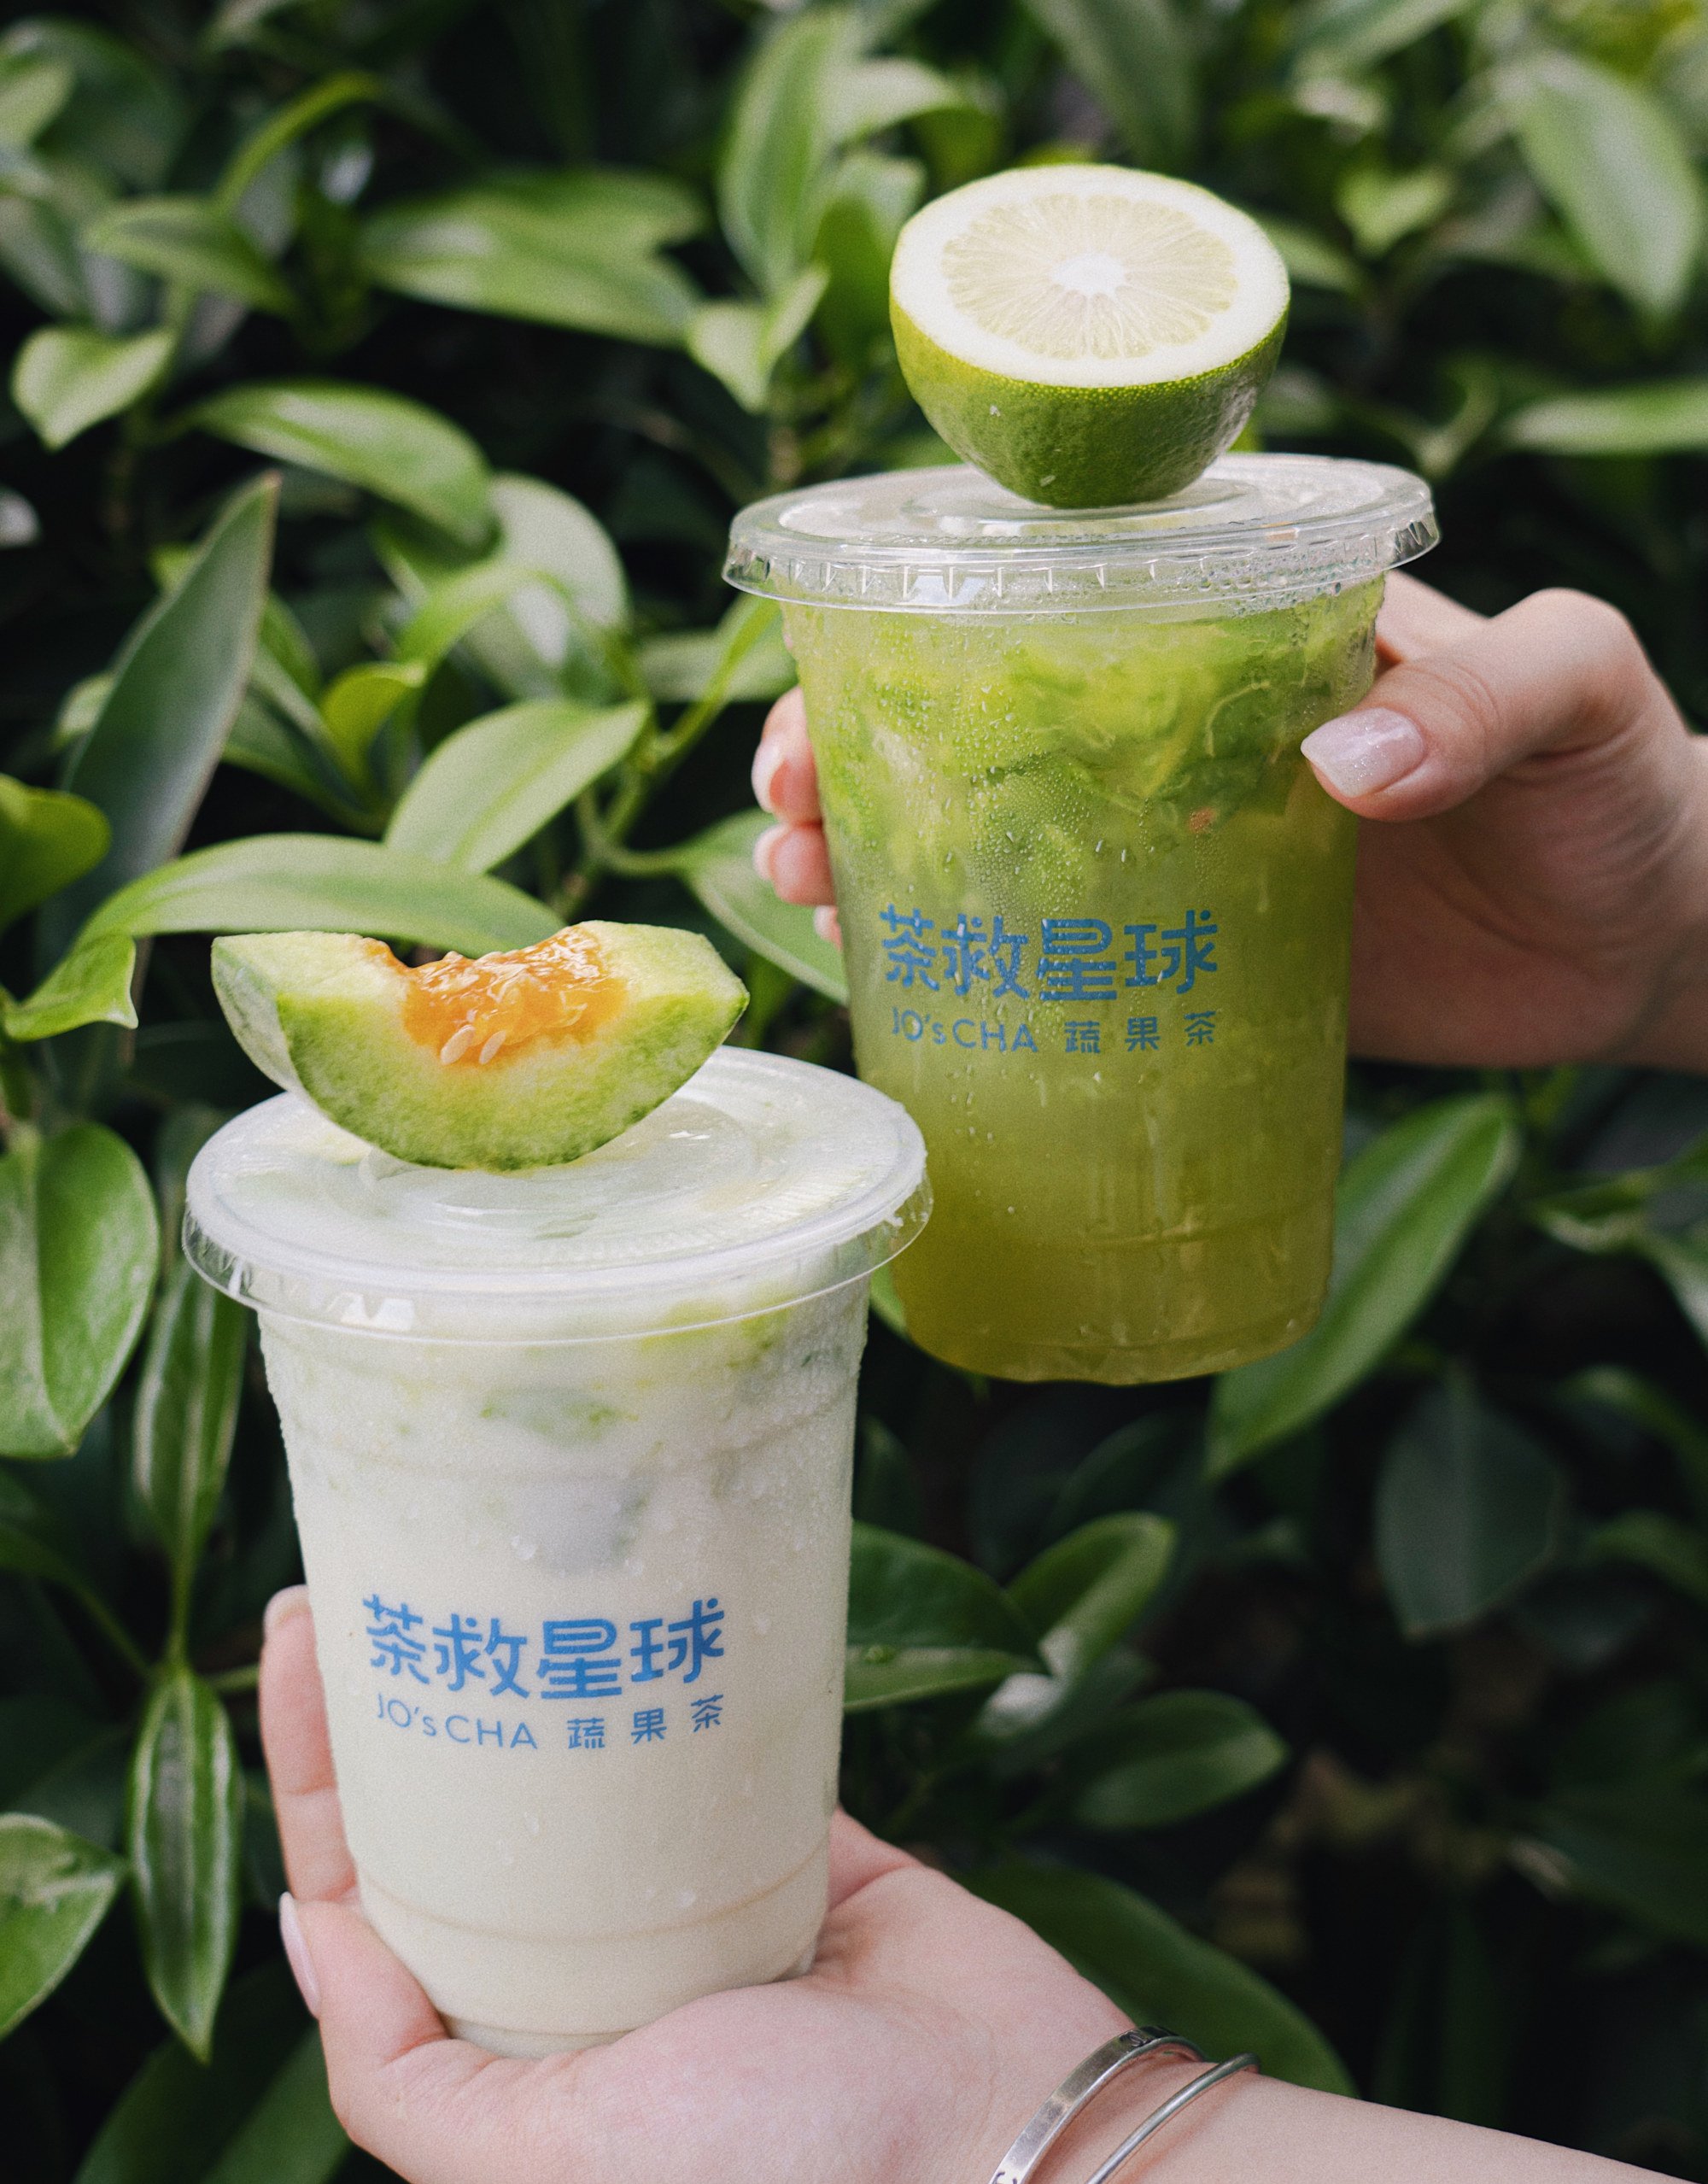 pucker up hongkongers: lemon-tea shops from mainland china want to wet your whistles this summer and beyond